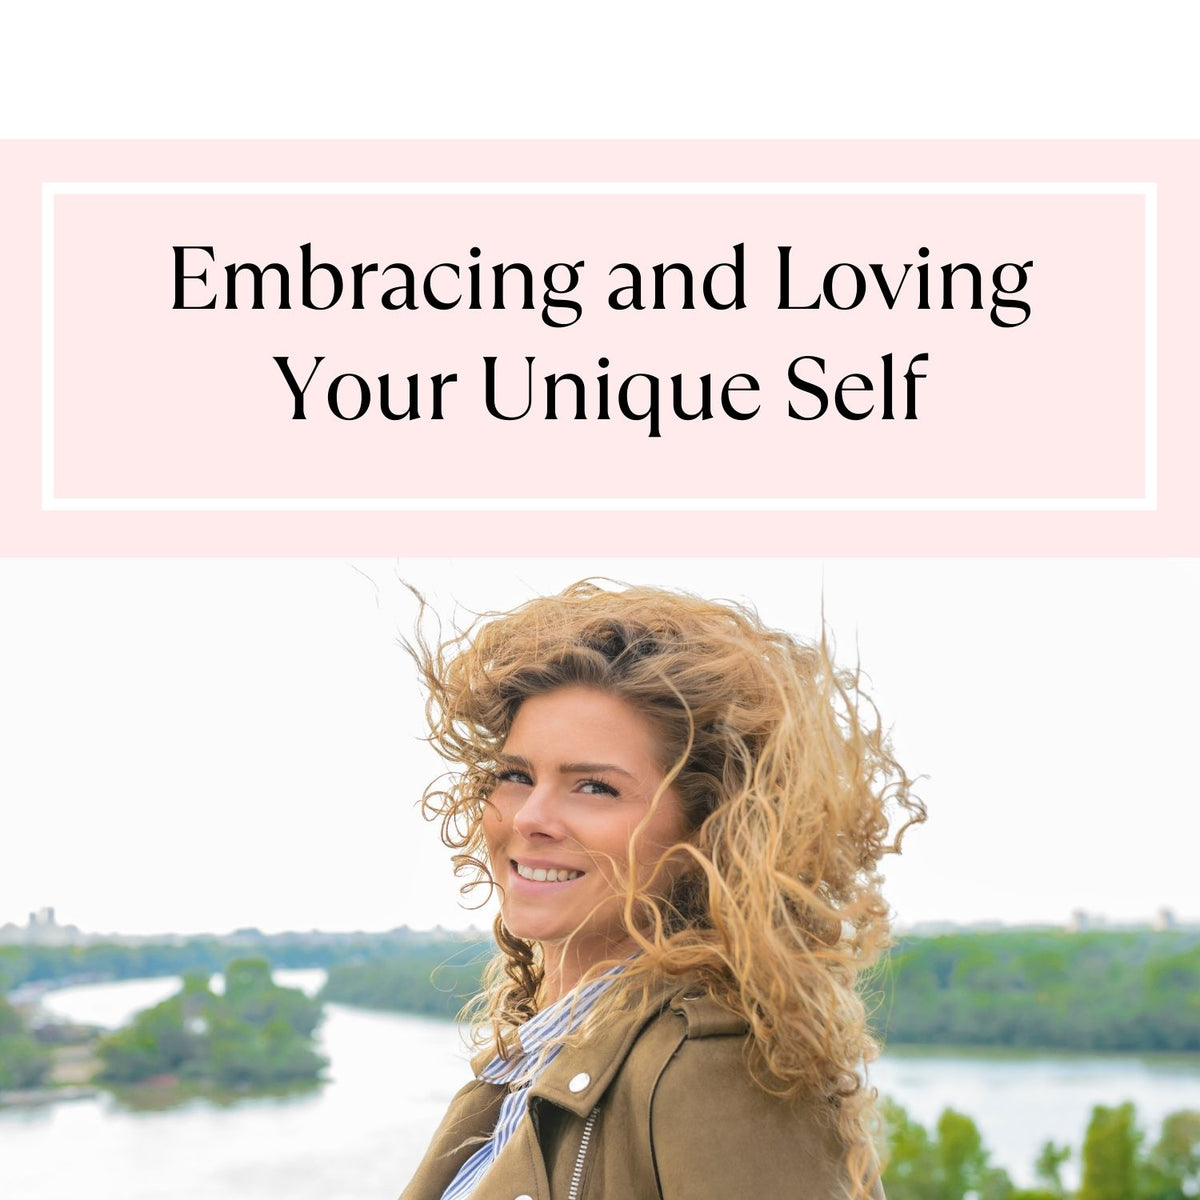 Embracing and Loving Your Unique Self